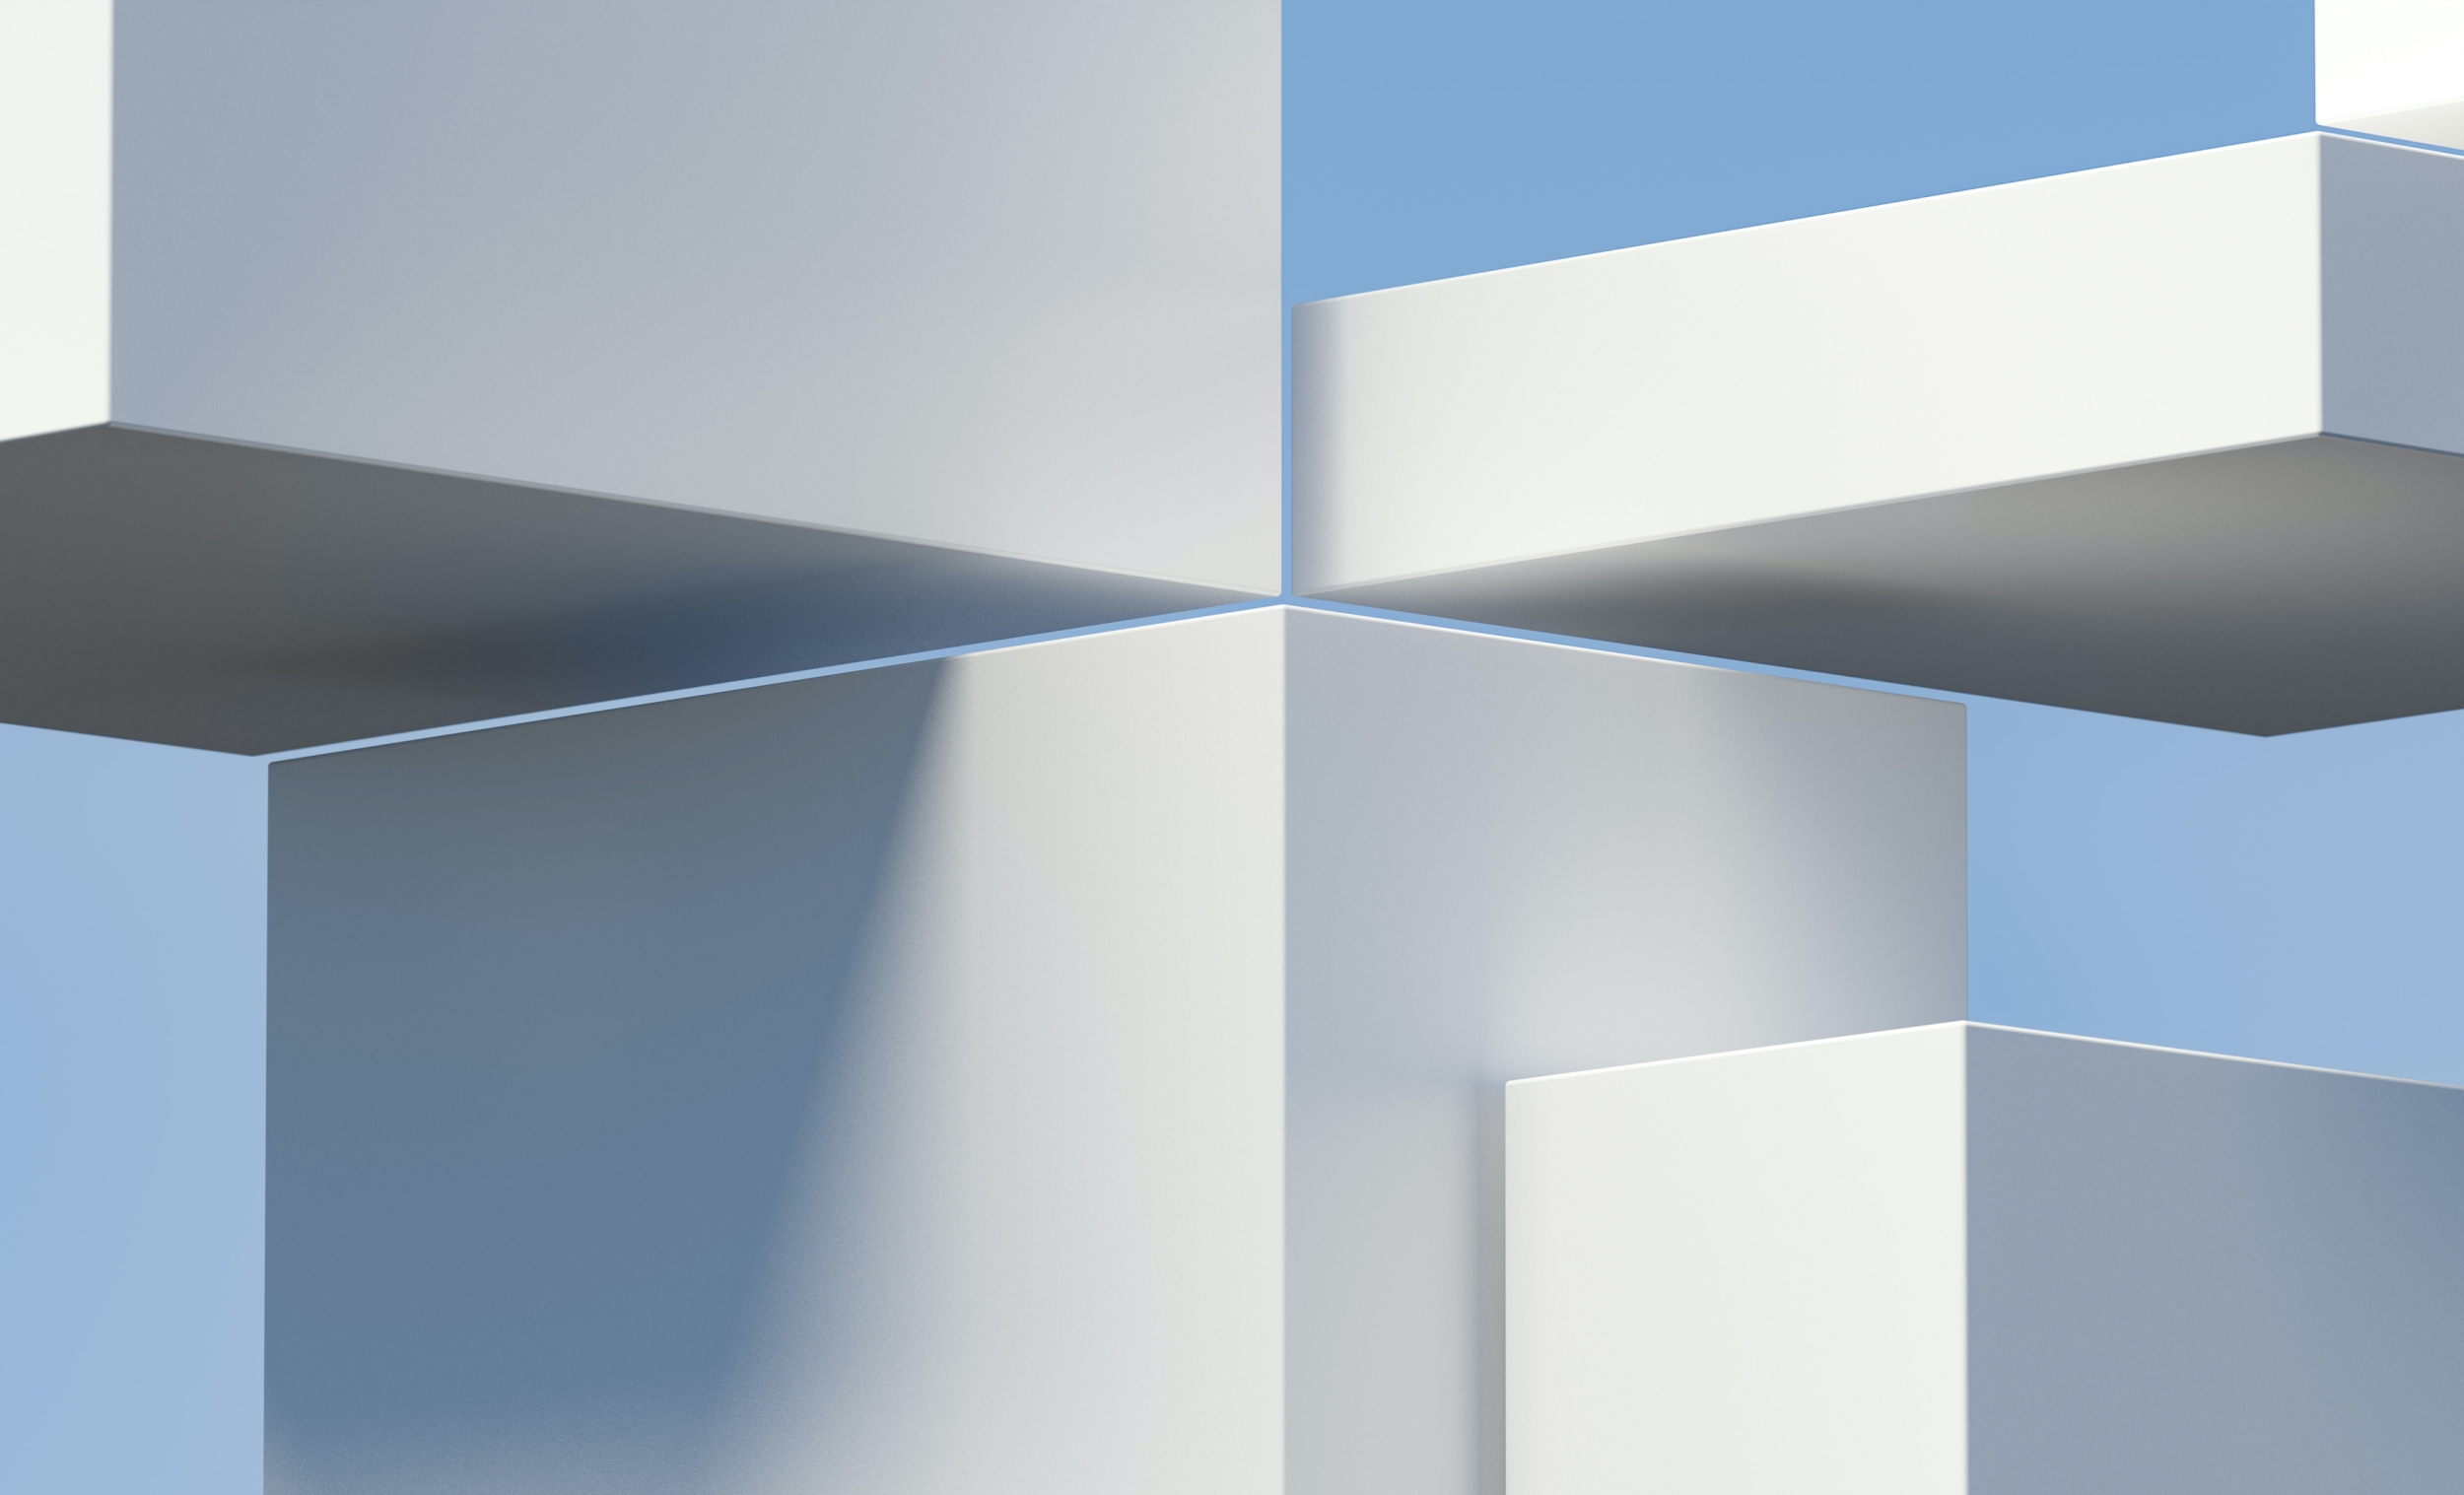 Abstract image of building blocks in white and light blue colours, representing modular features.